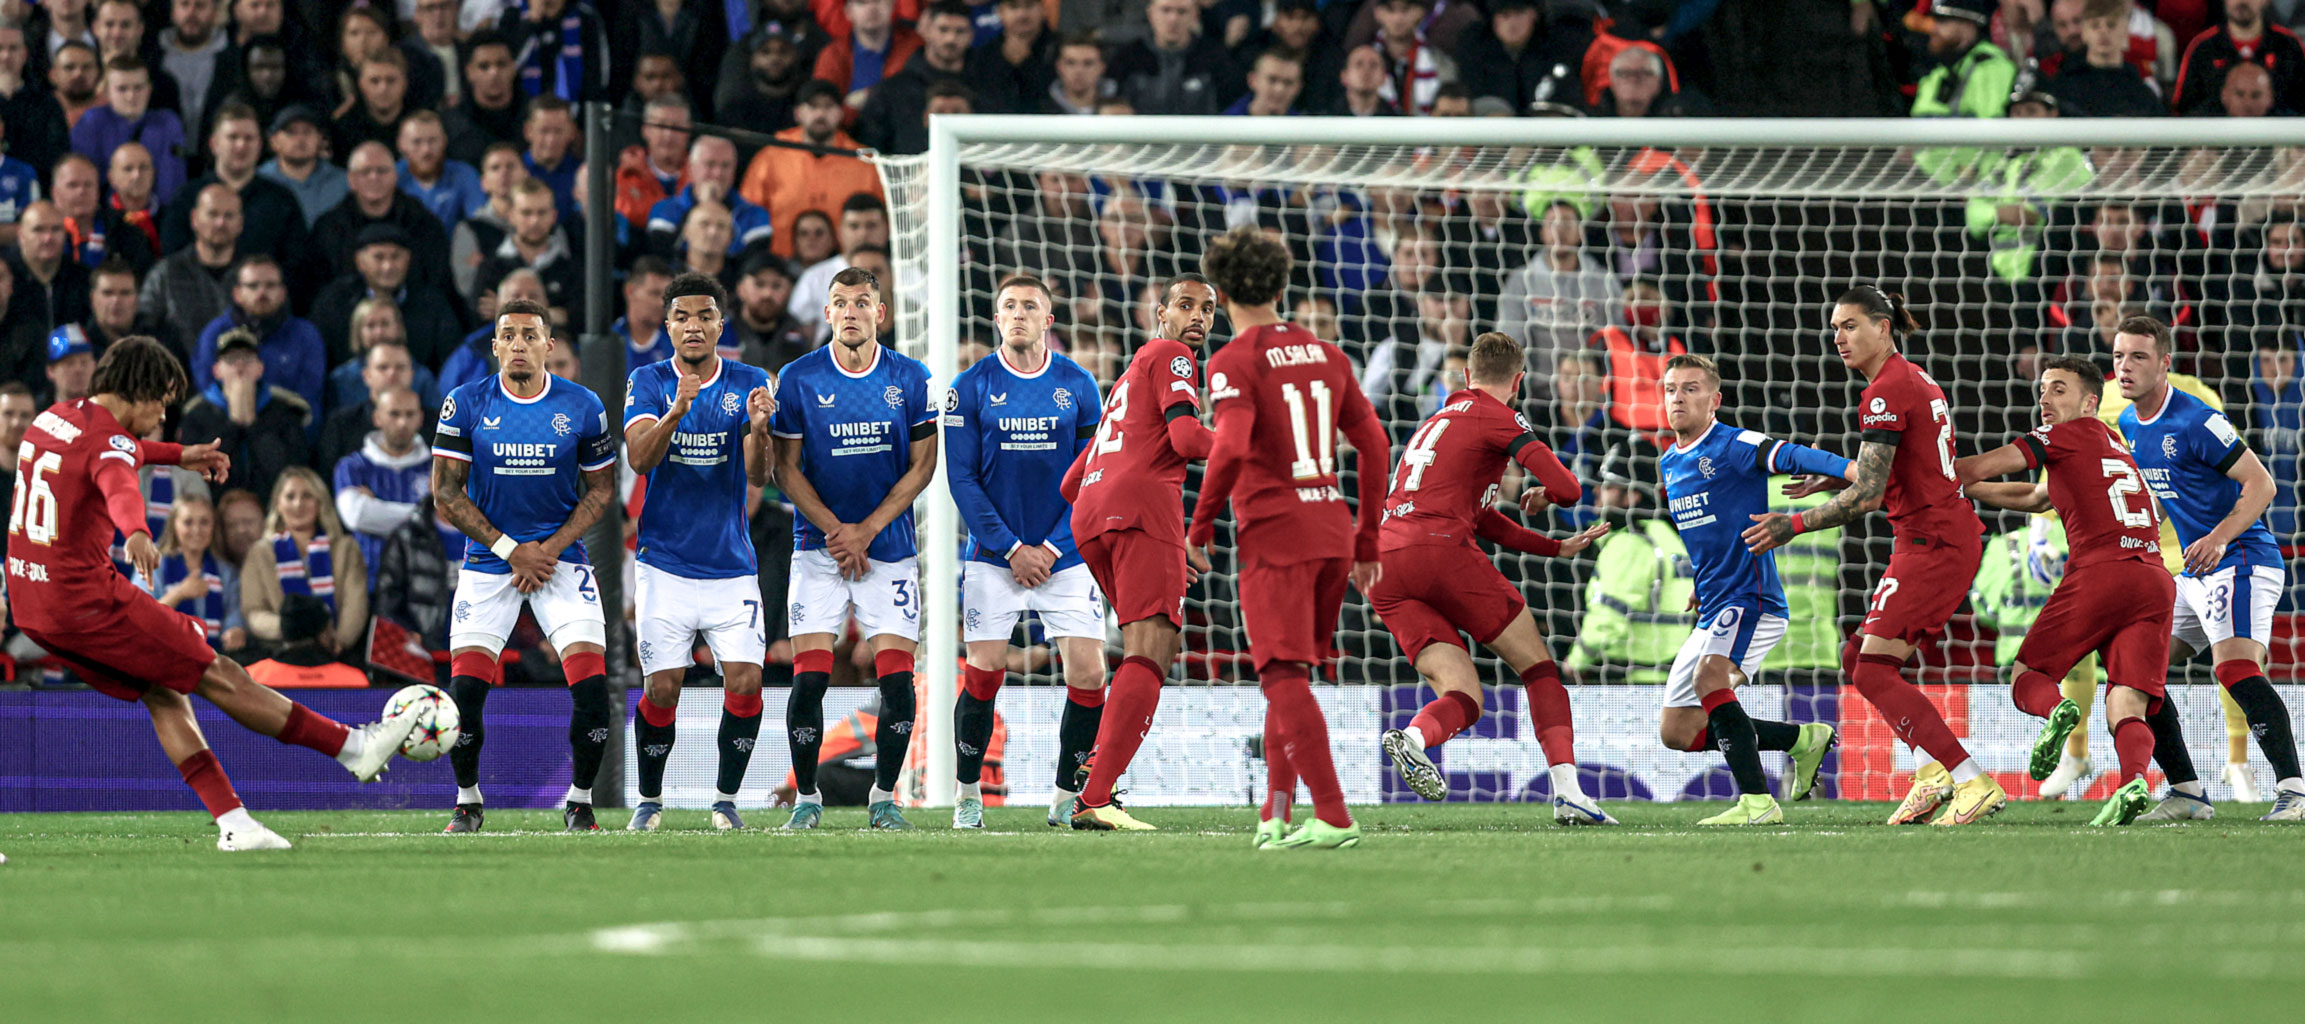 Liverpool 2 Rangers 0: Champions League tactical analysis